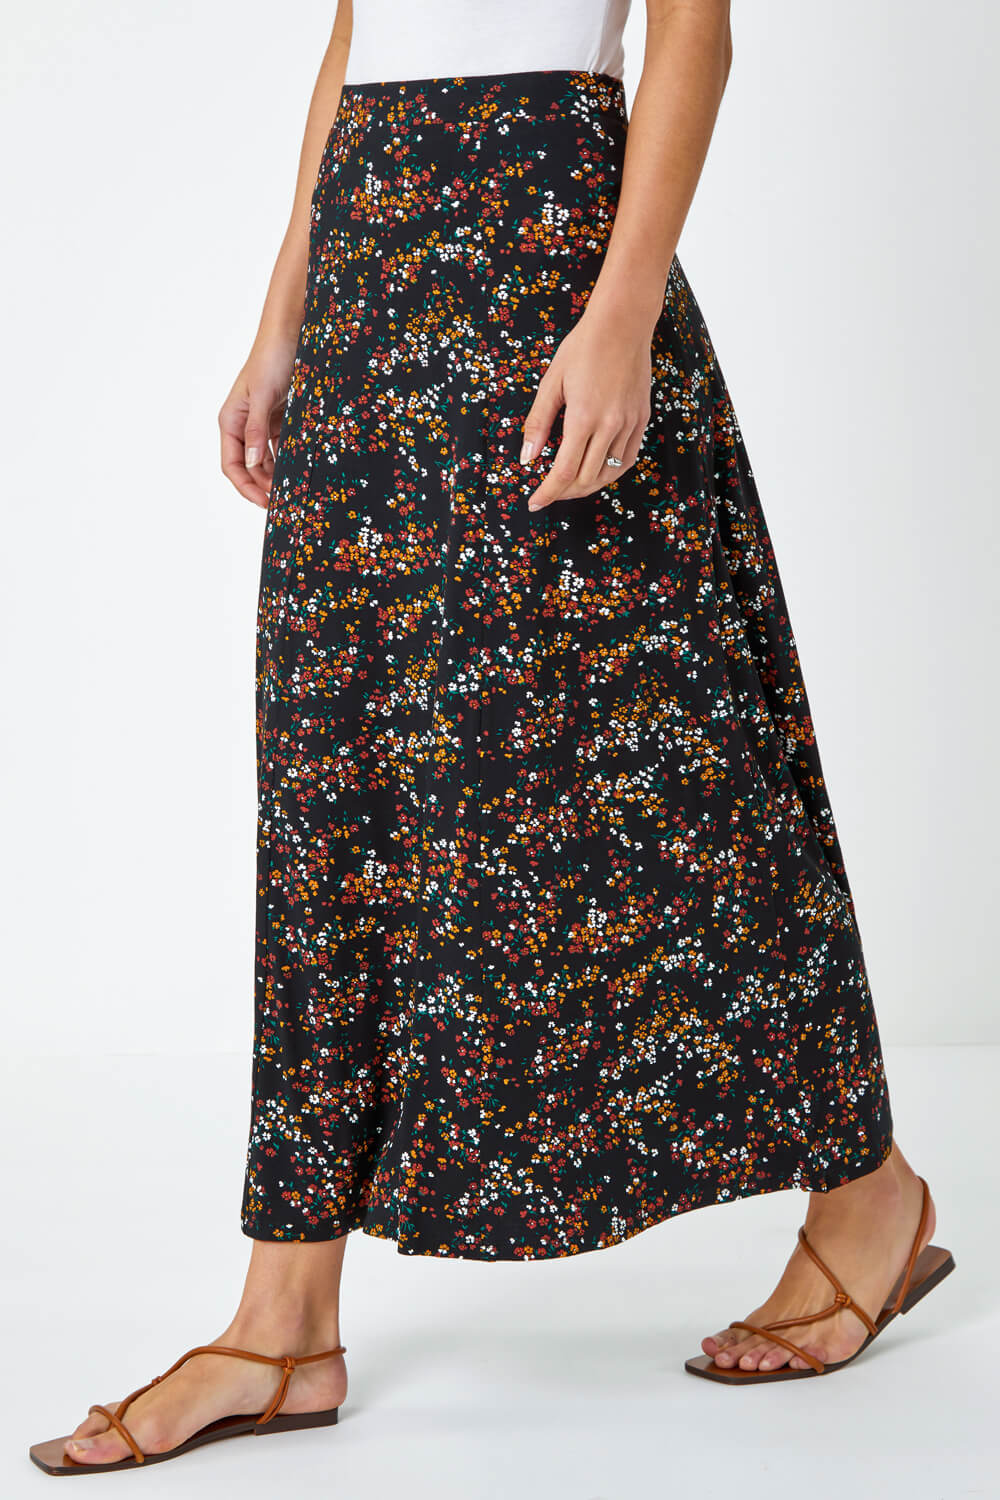 Black Ditsy Floral Jersey Skirt, Image 4 of 5